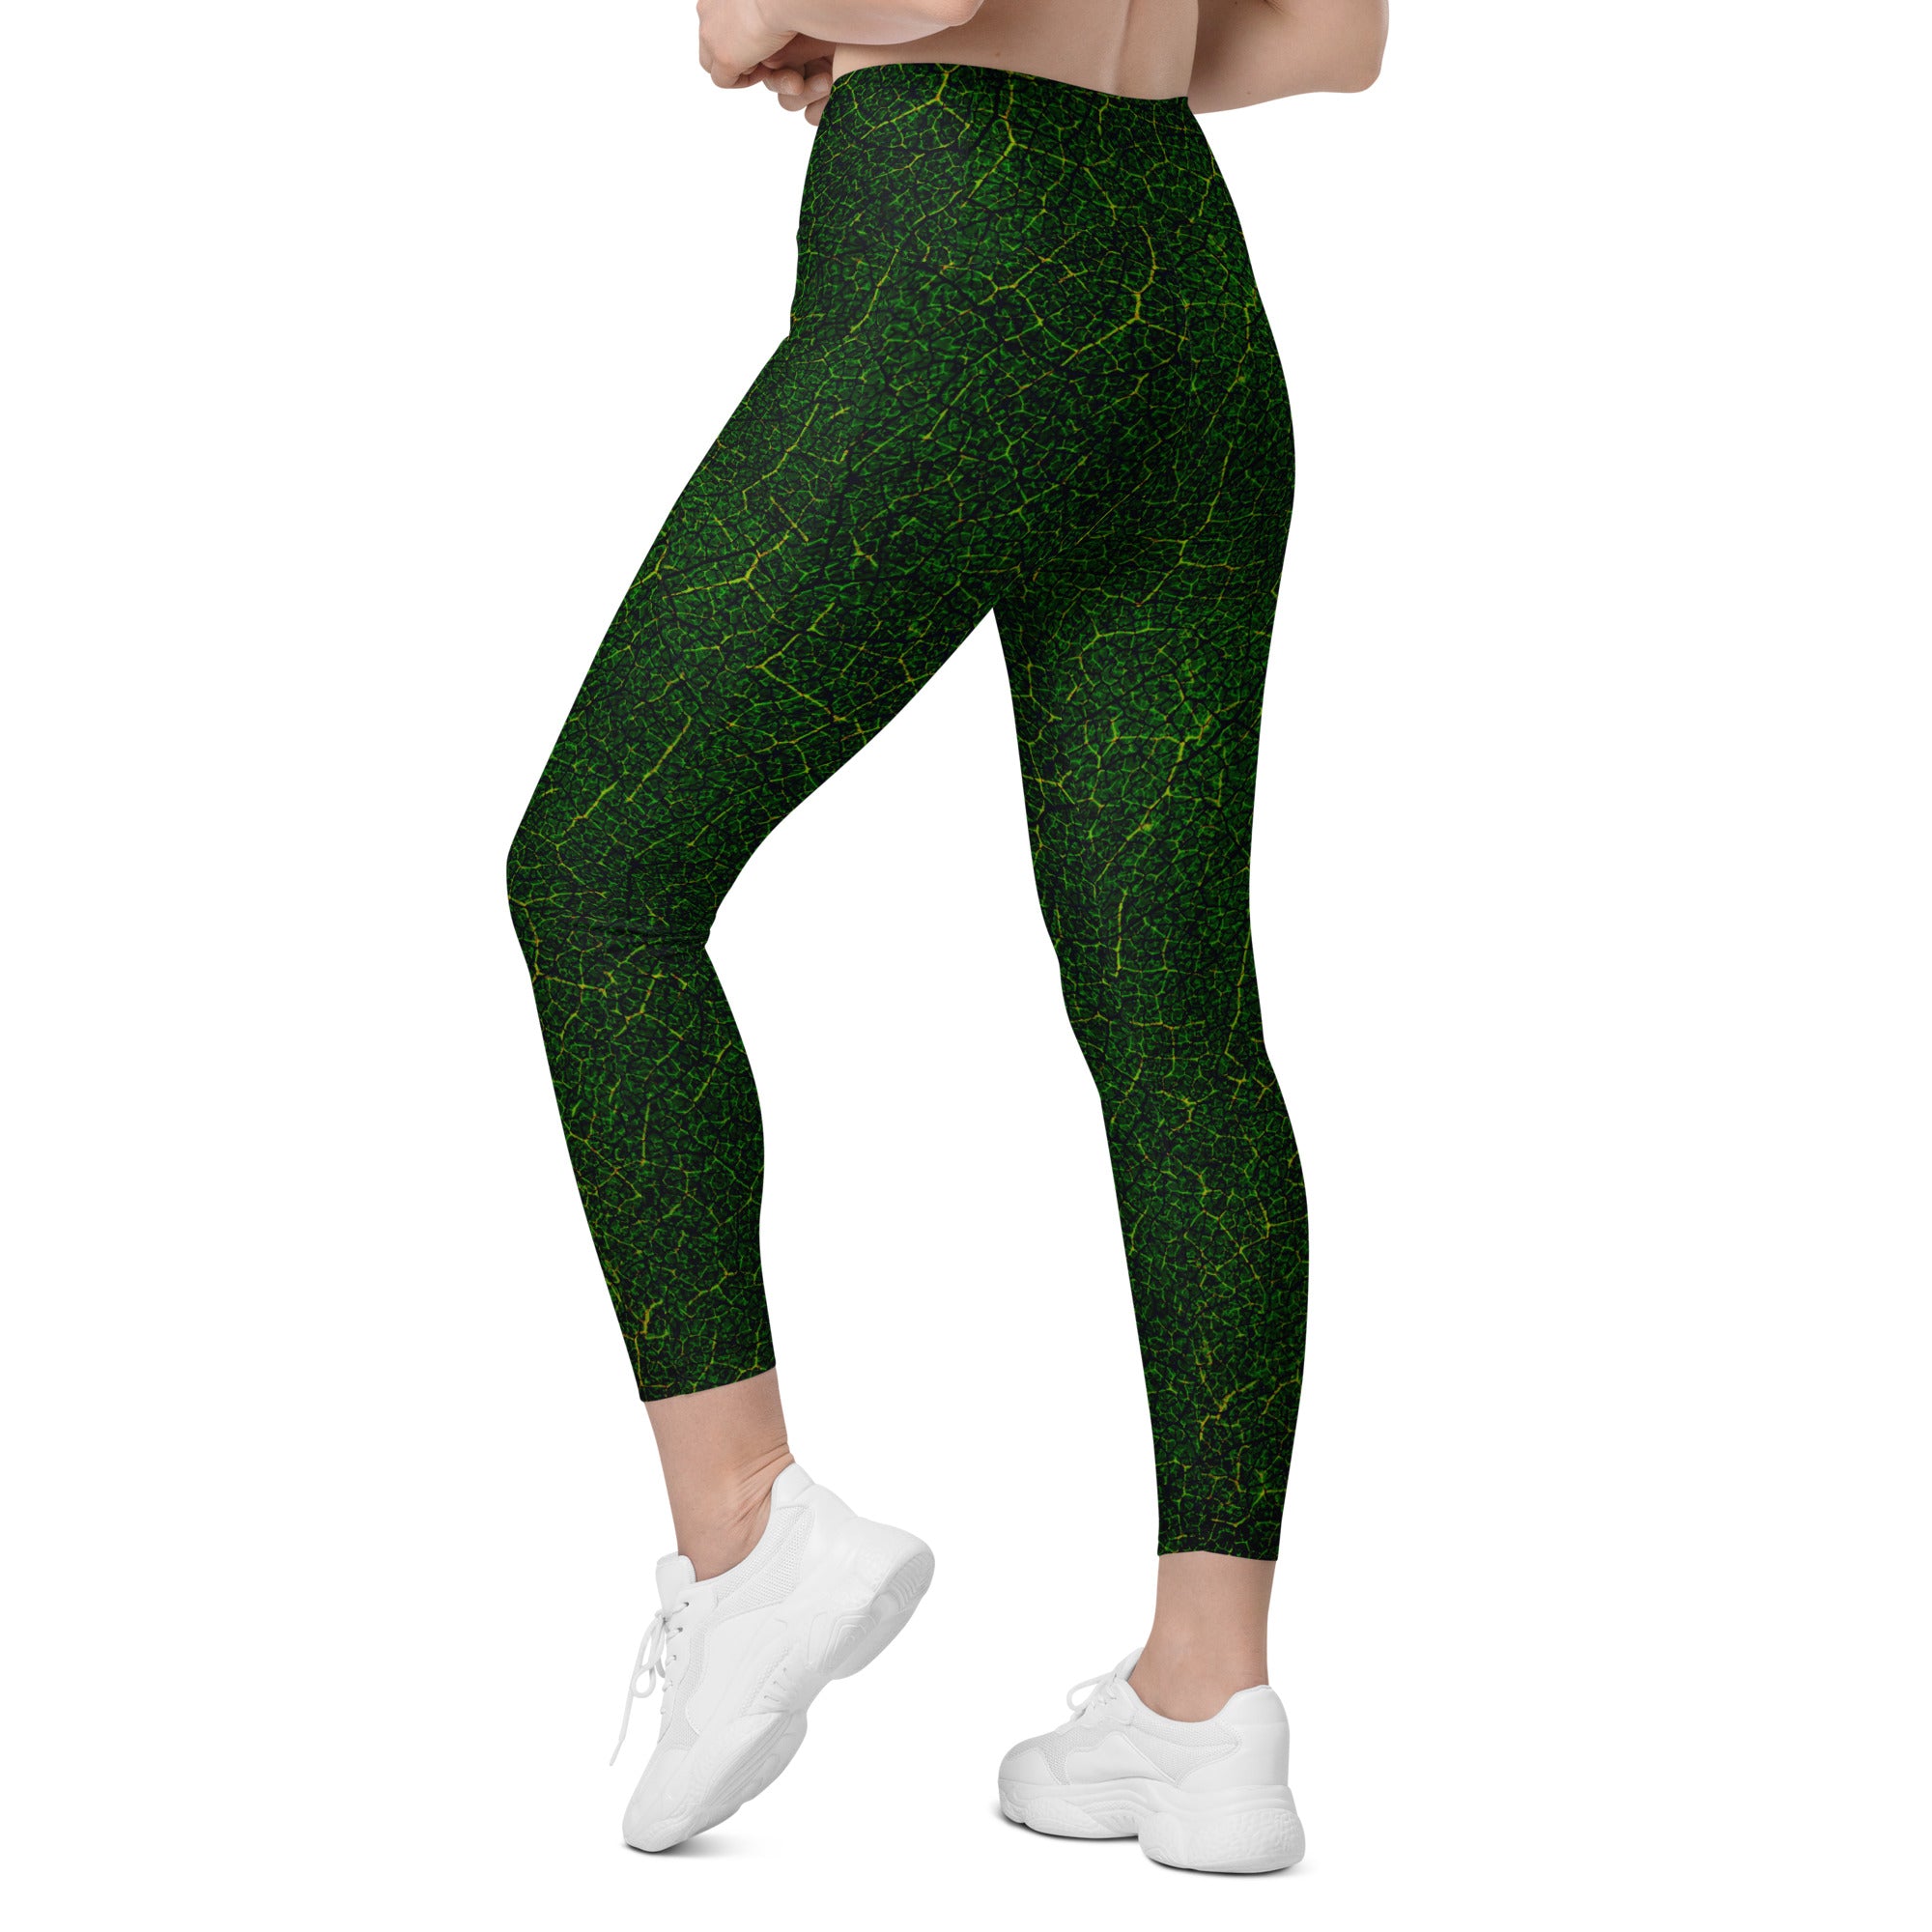 Active look featuring Botanical Bliss Crossover Leggings during a yoga session outdoors, highlighting their flexibility and nature-inspired pattern.